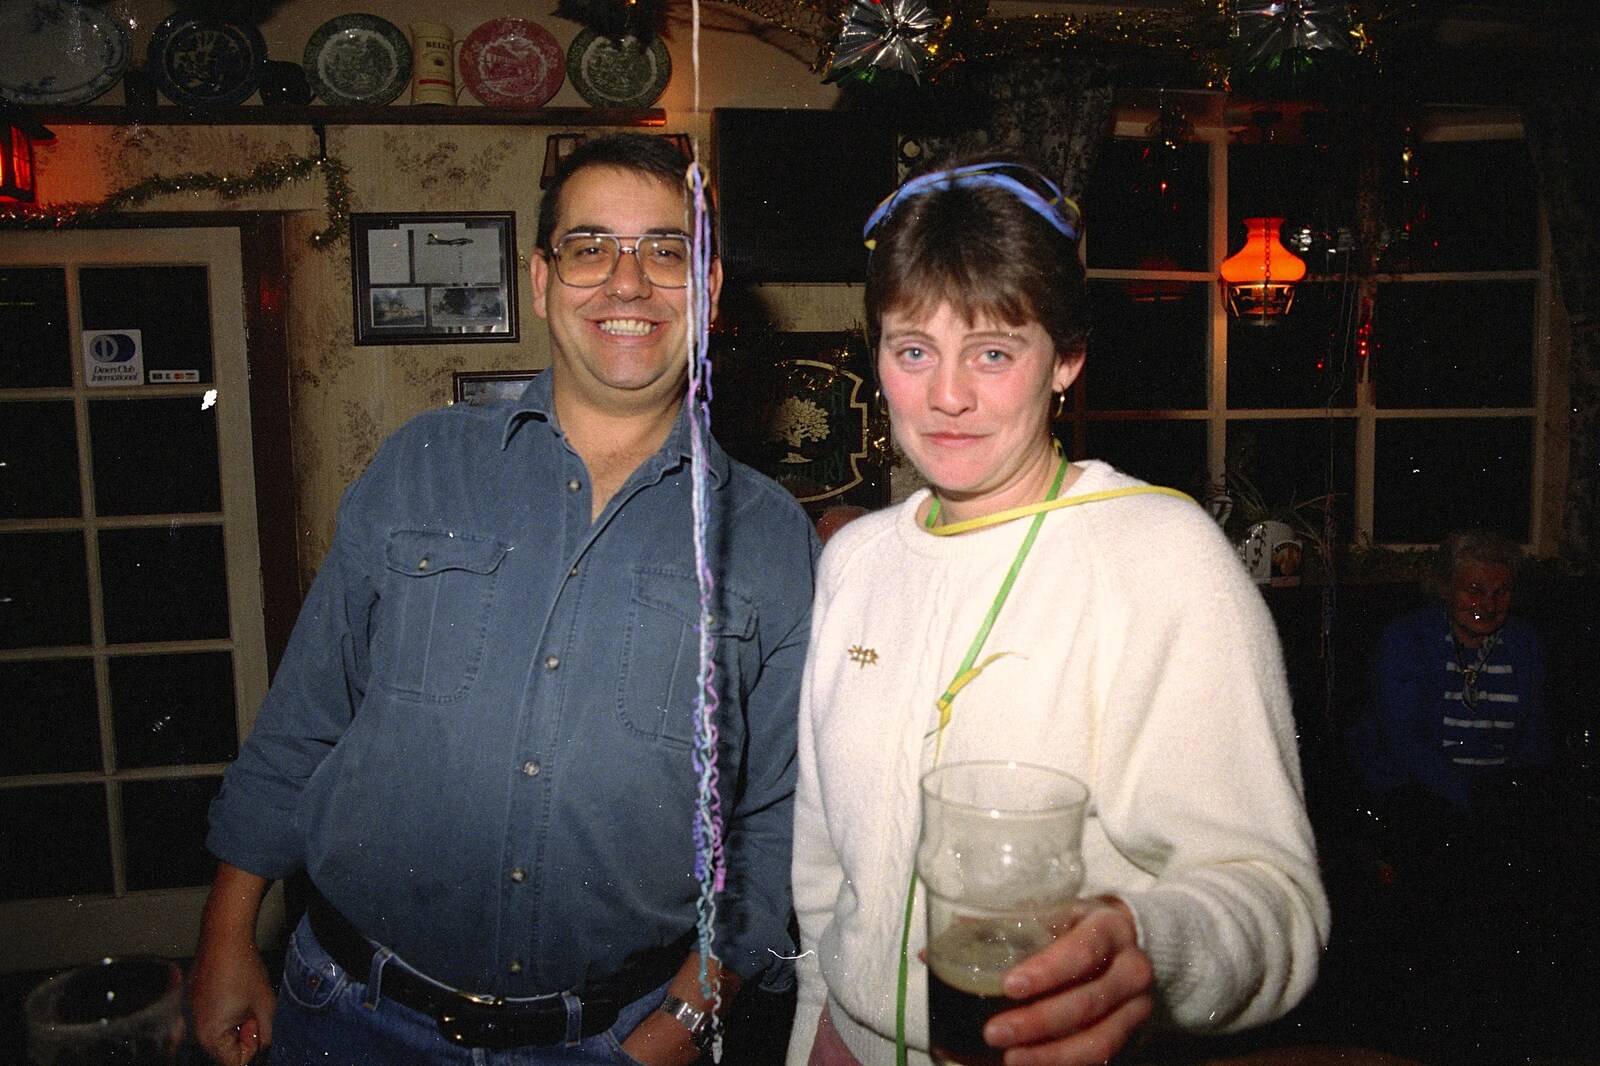 Roger and Pippa from New Year's Eve at the Swan Inn, Brome, Suffolk - 31st December 1994